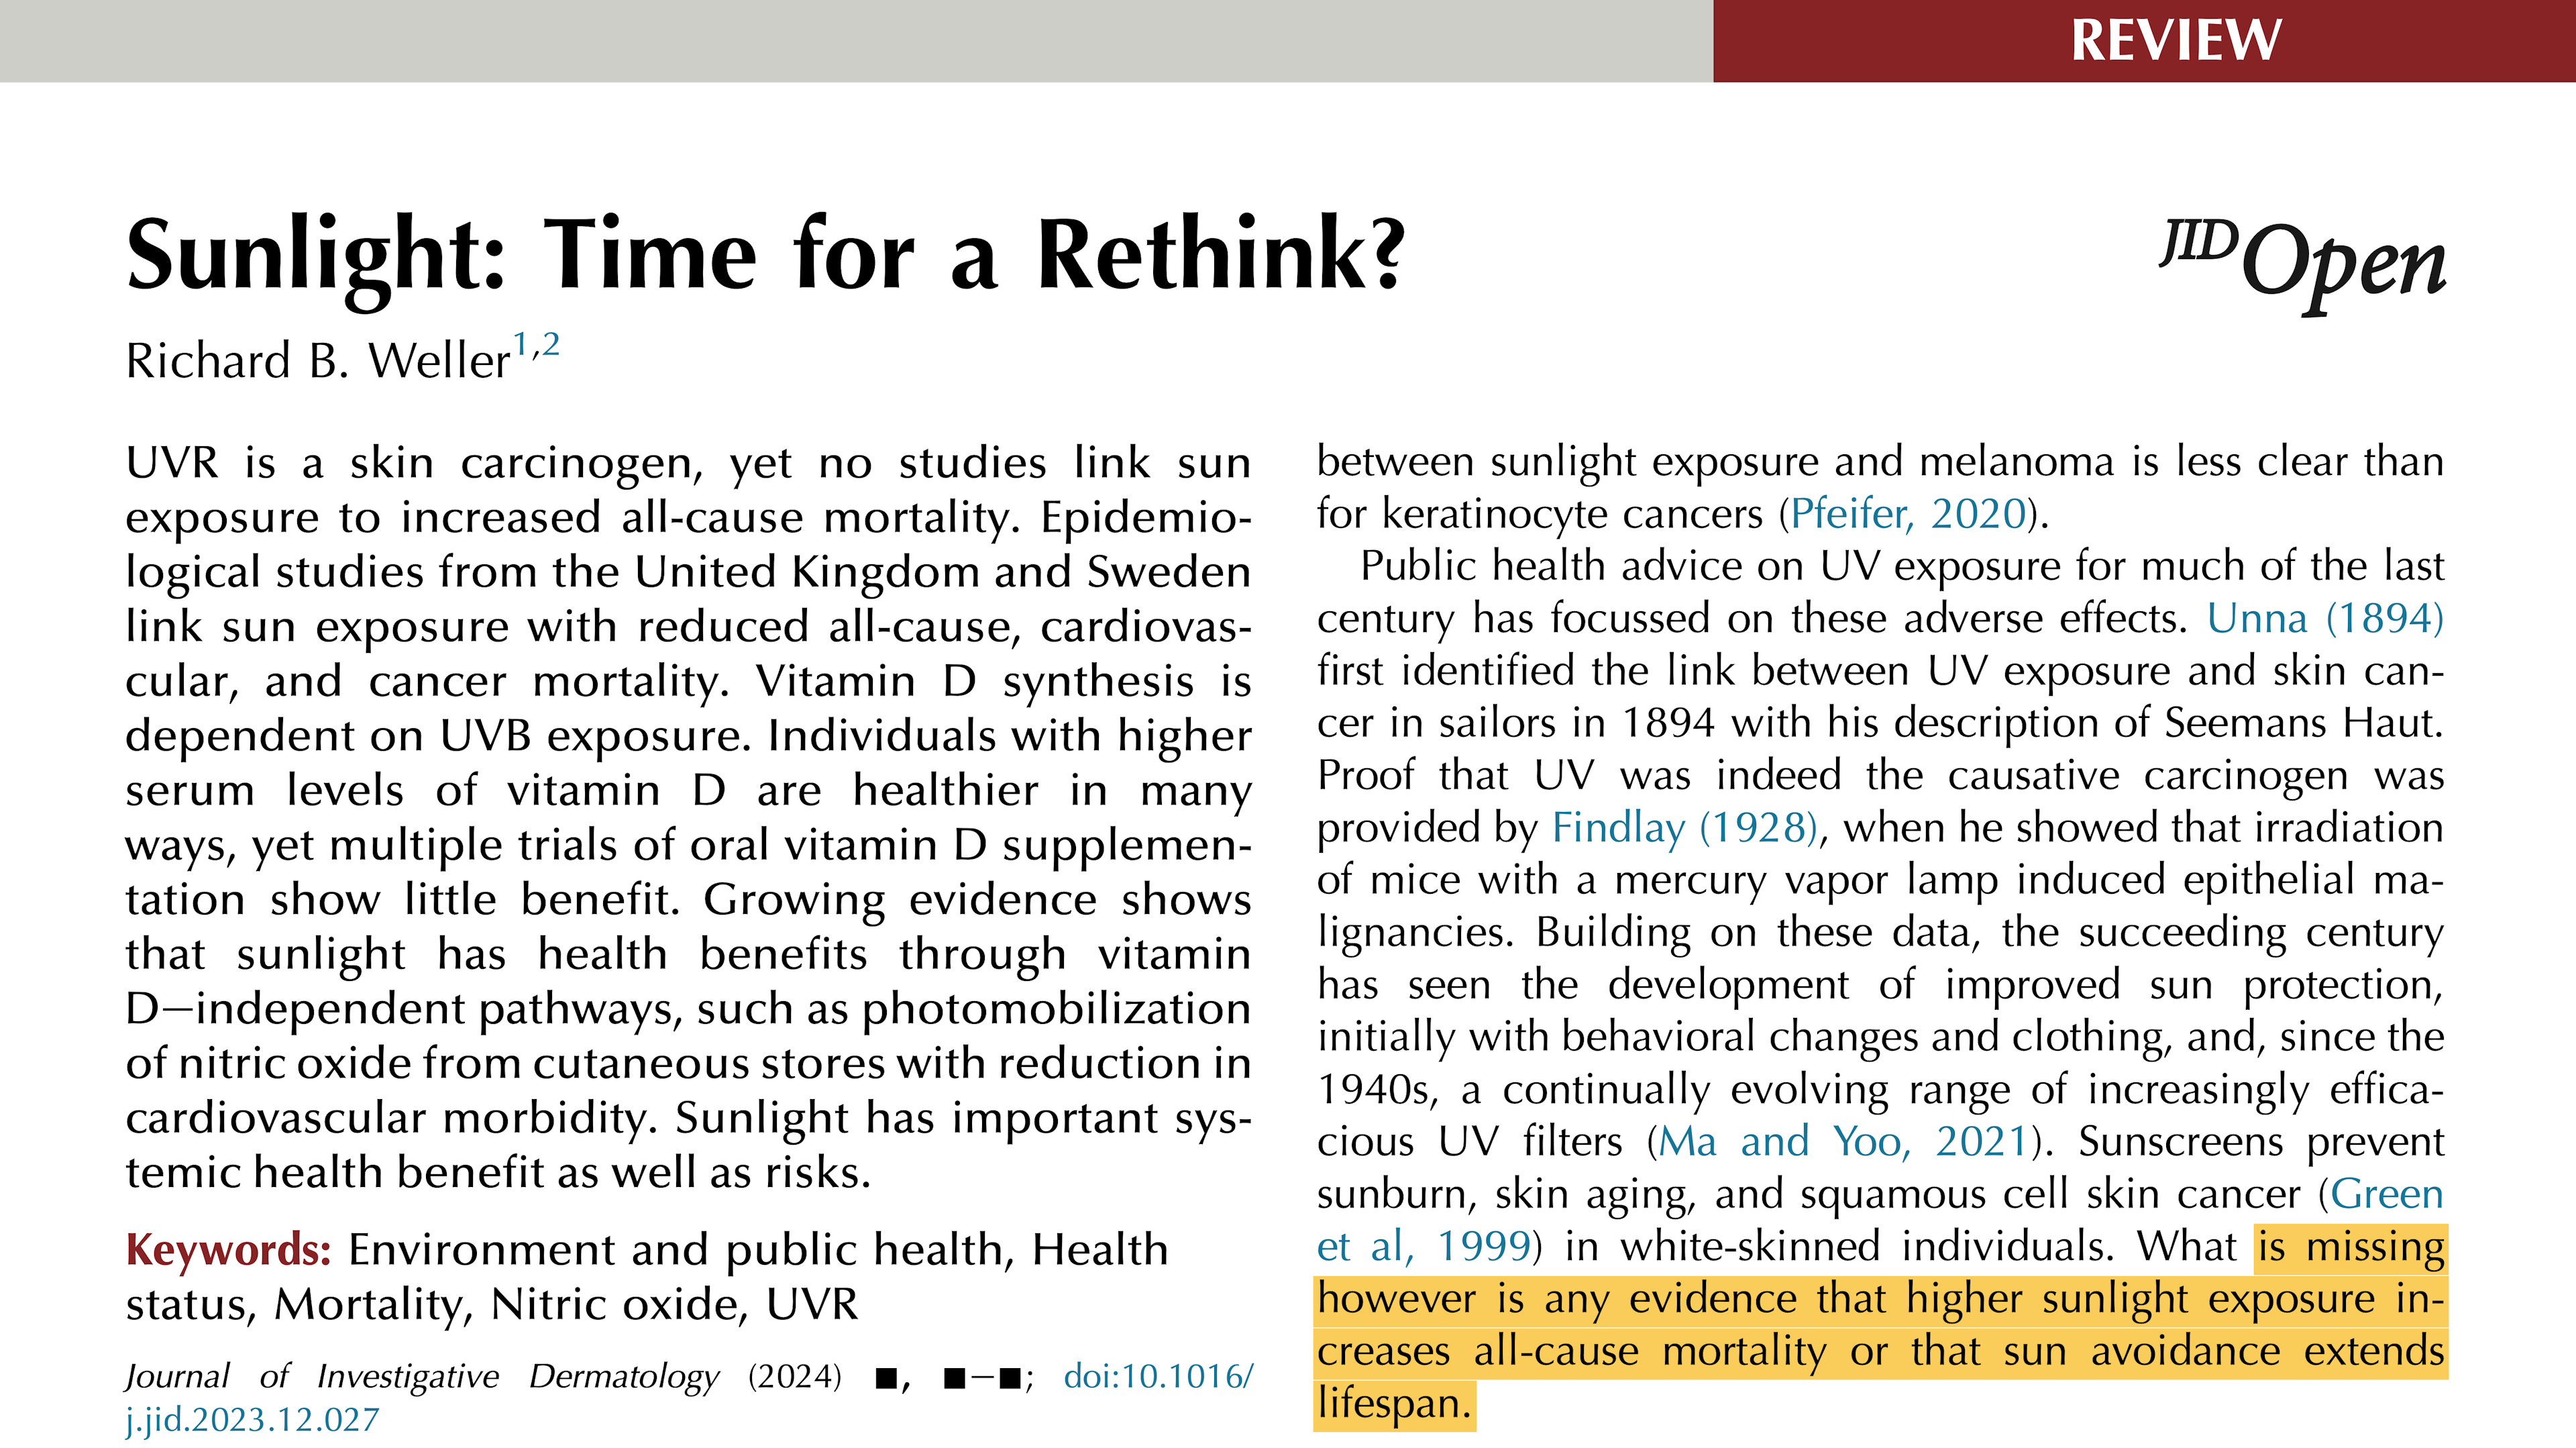 Summary: Sunlight, Time for a Rethink